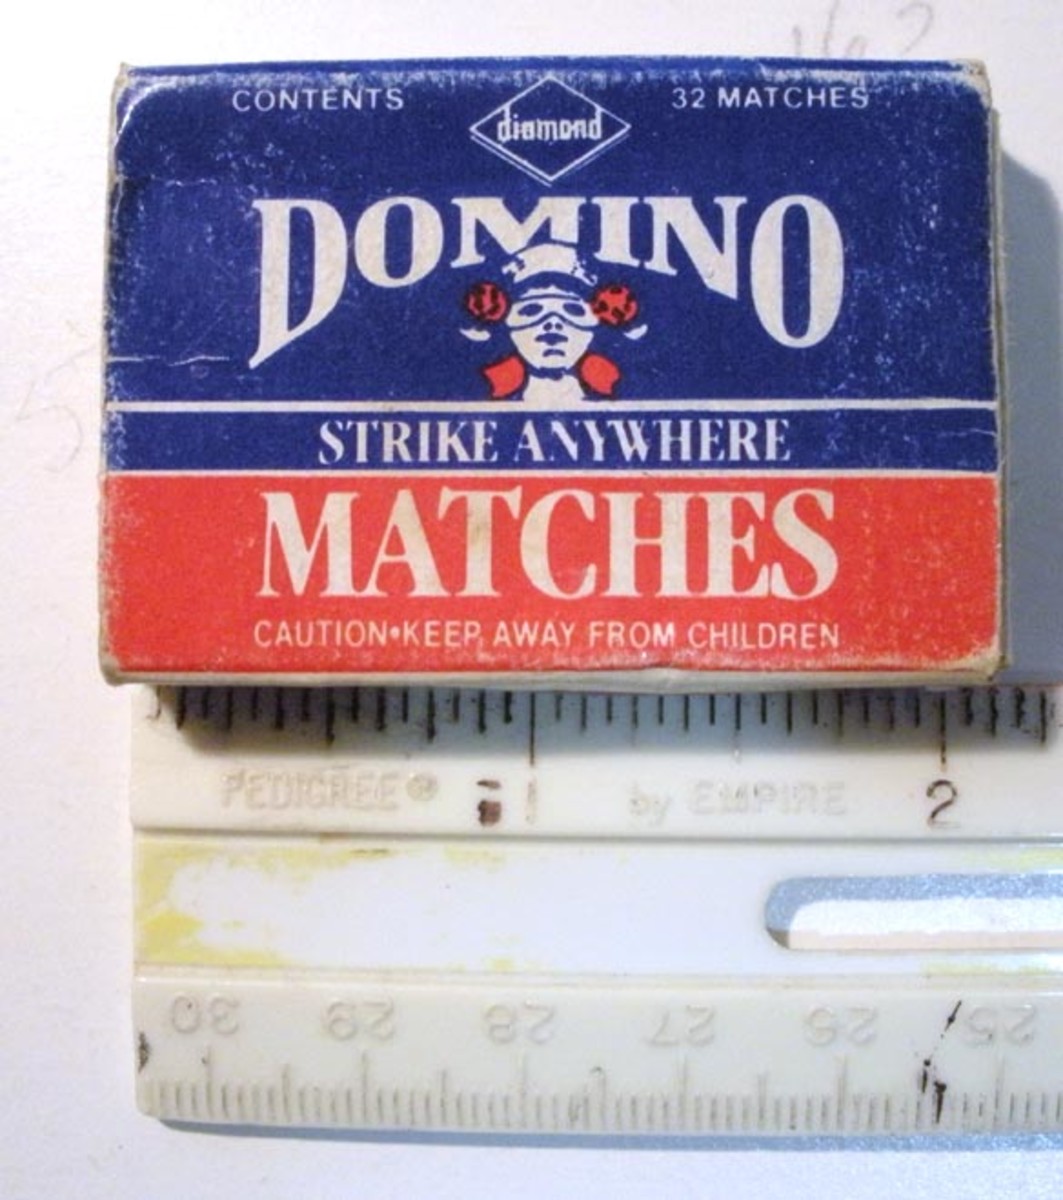 This is the size matchbox you need